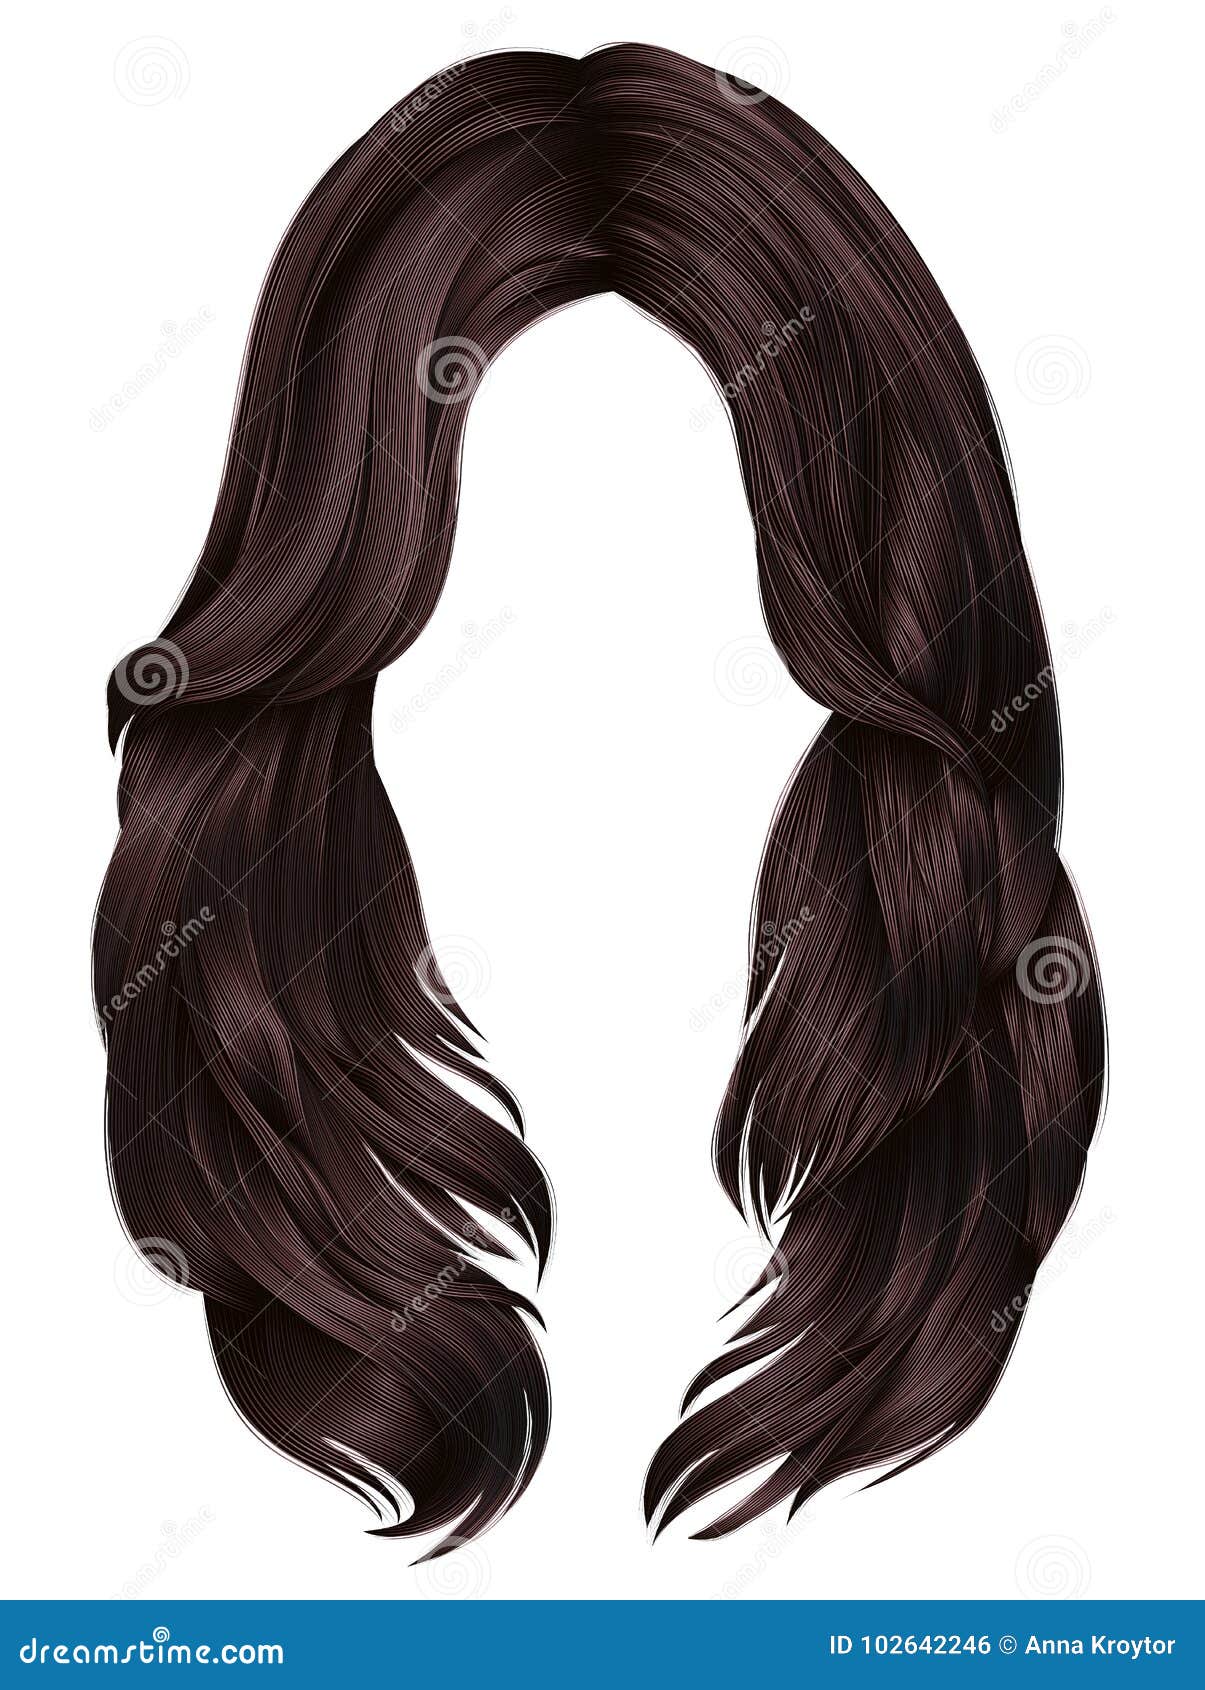 Trendy Woman Long Hairs Brunette Brown Brunette  Fashion .  Realistic Graphic 3d Stock Illustration - Illustration of attractive,  setting: 102642246